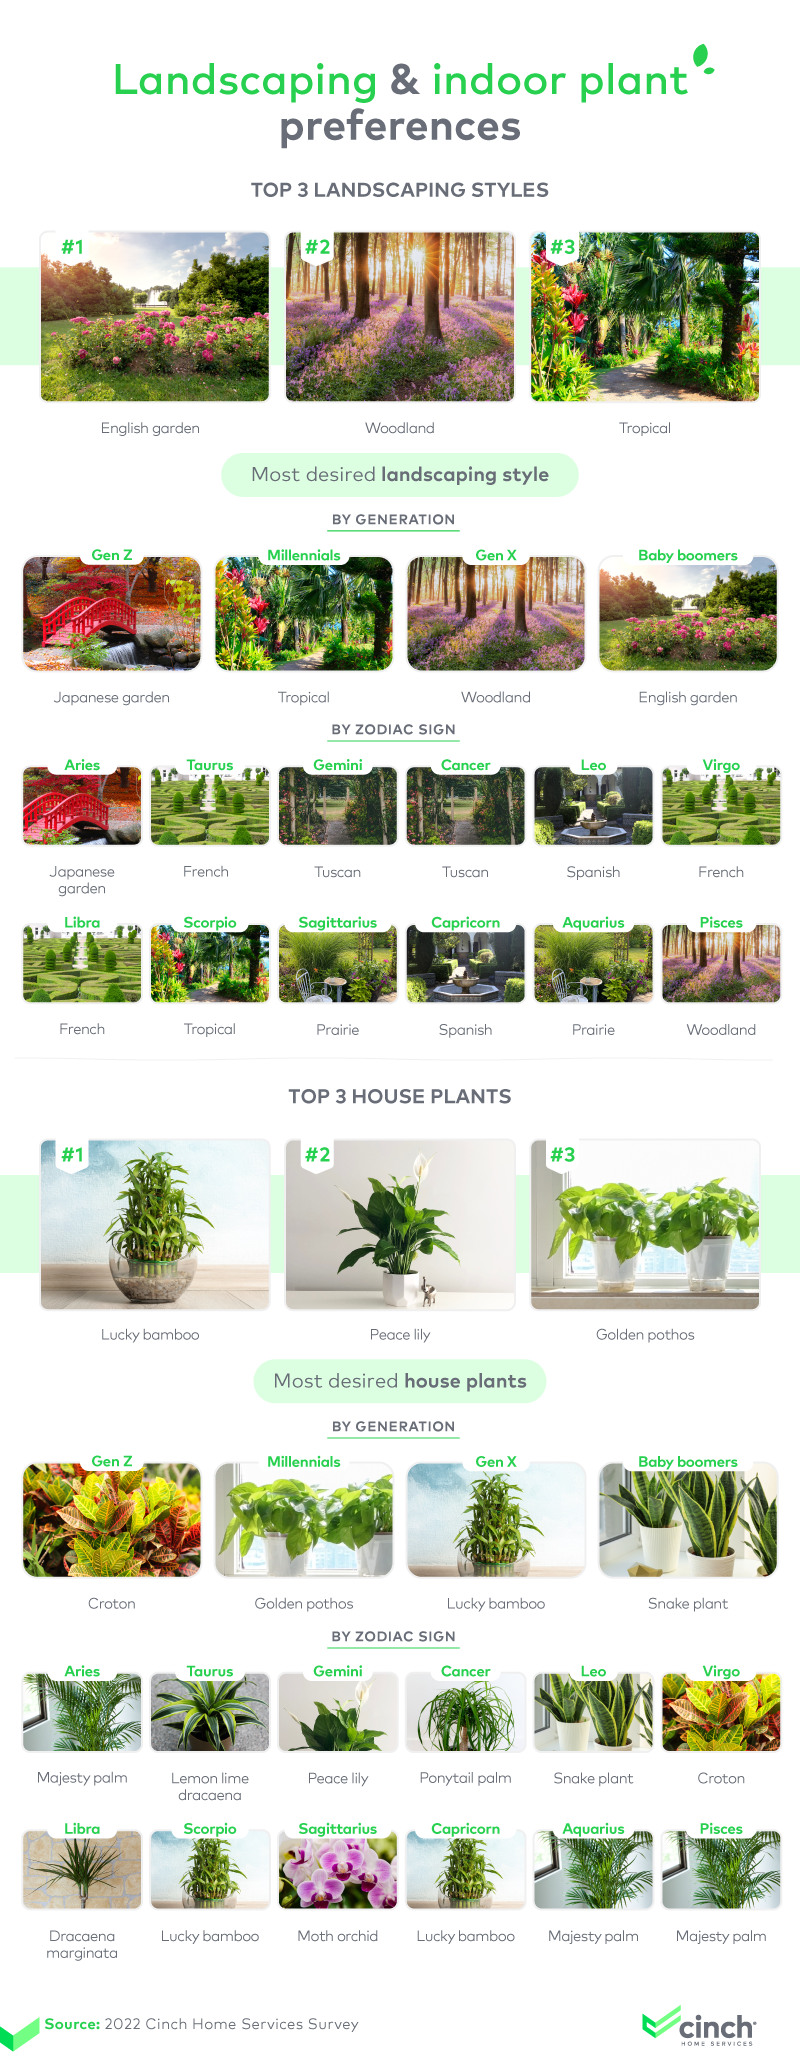 Landscaping and indoor plant preferences